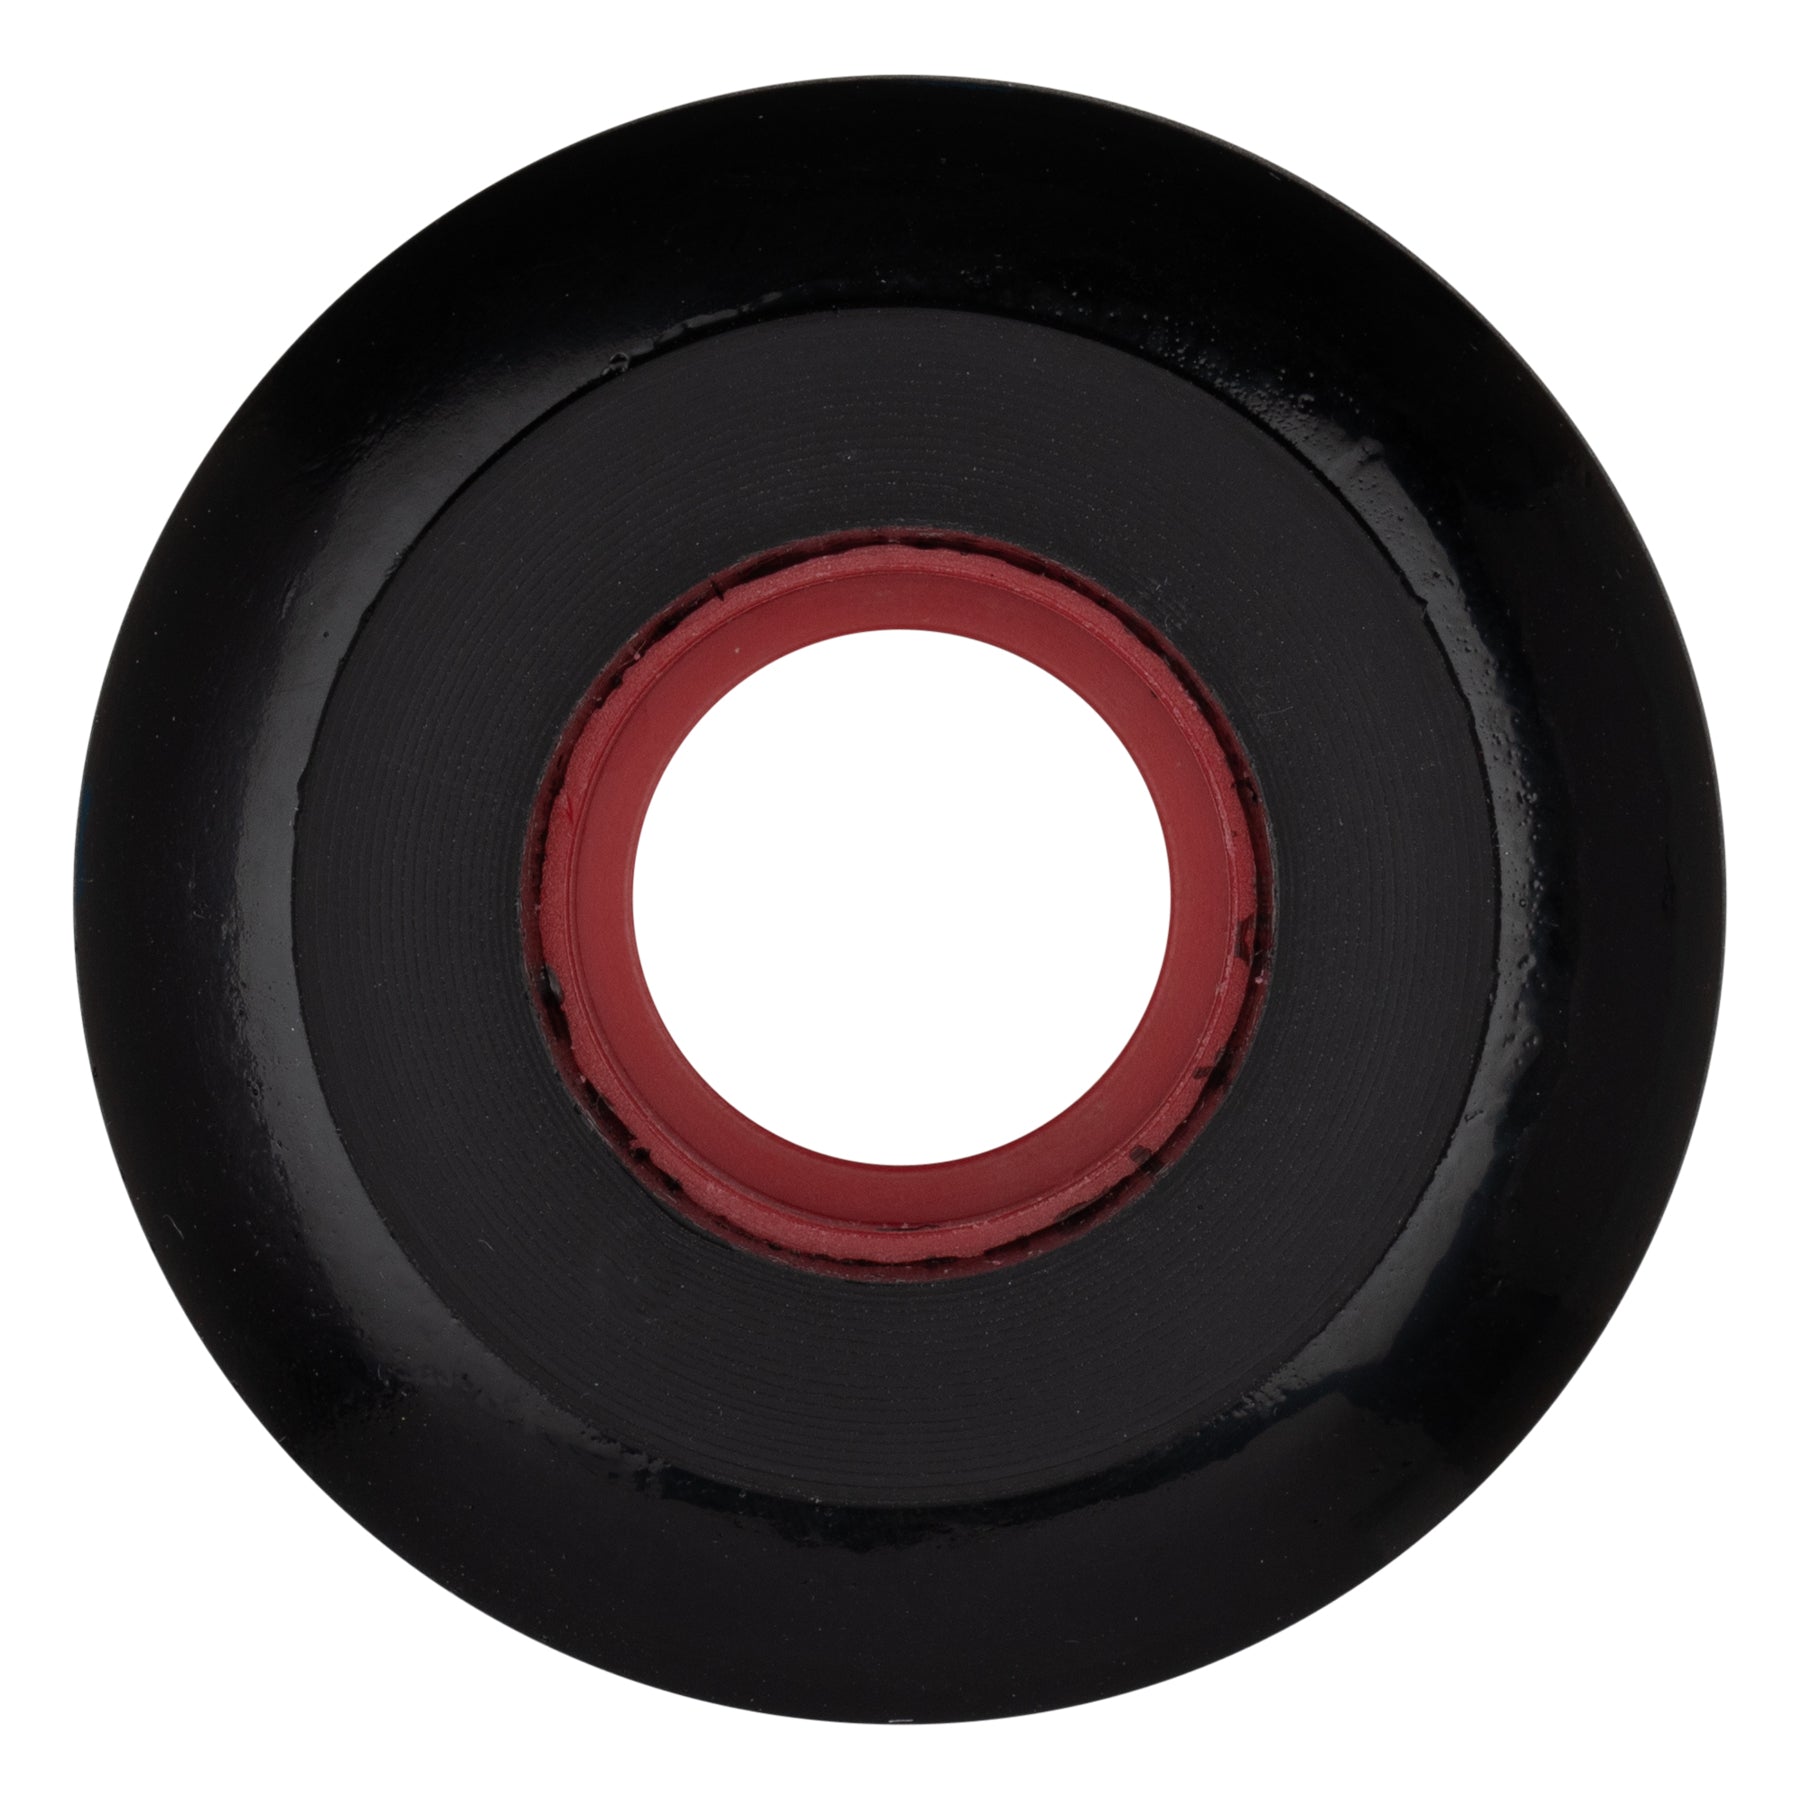 Ricta Wheels Clouds Black Red 55mm 86a